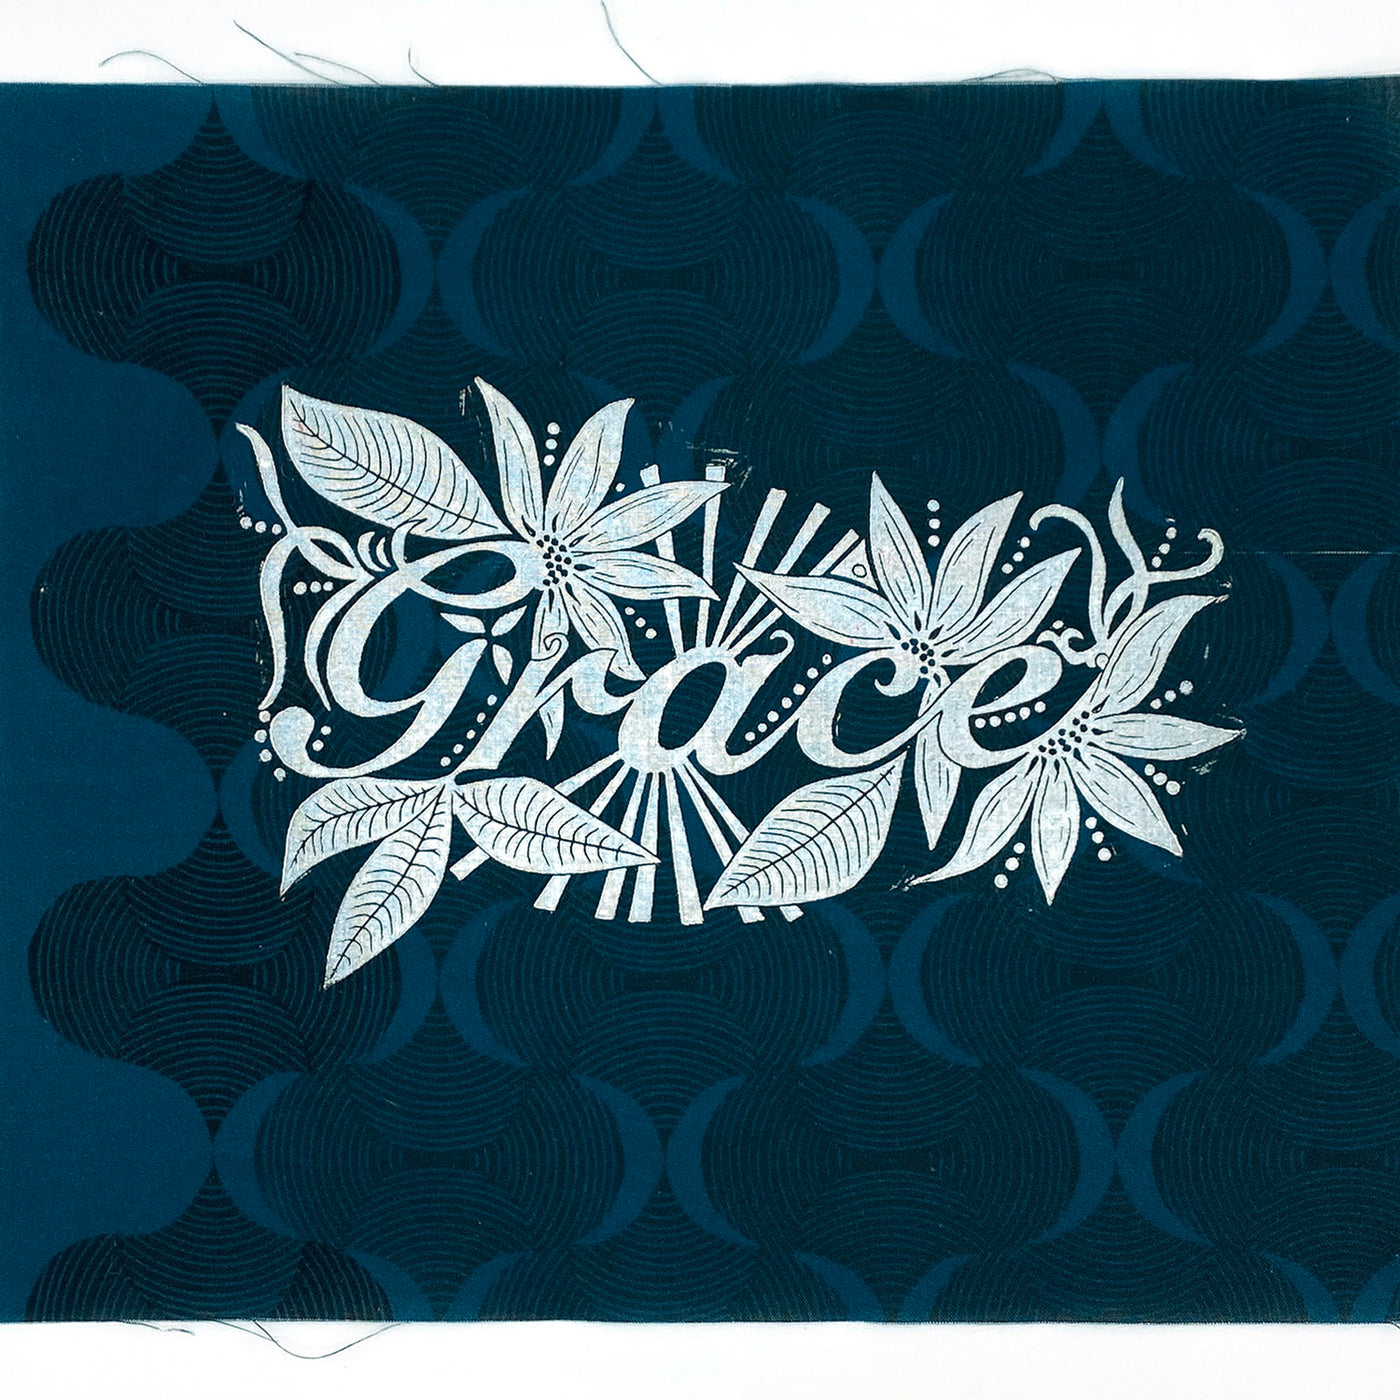 Pre-Order Grace Block Printed Panels - by Valori Wells (4 colors available)